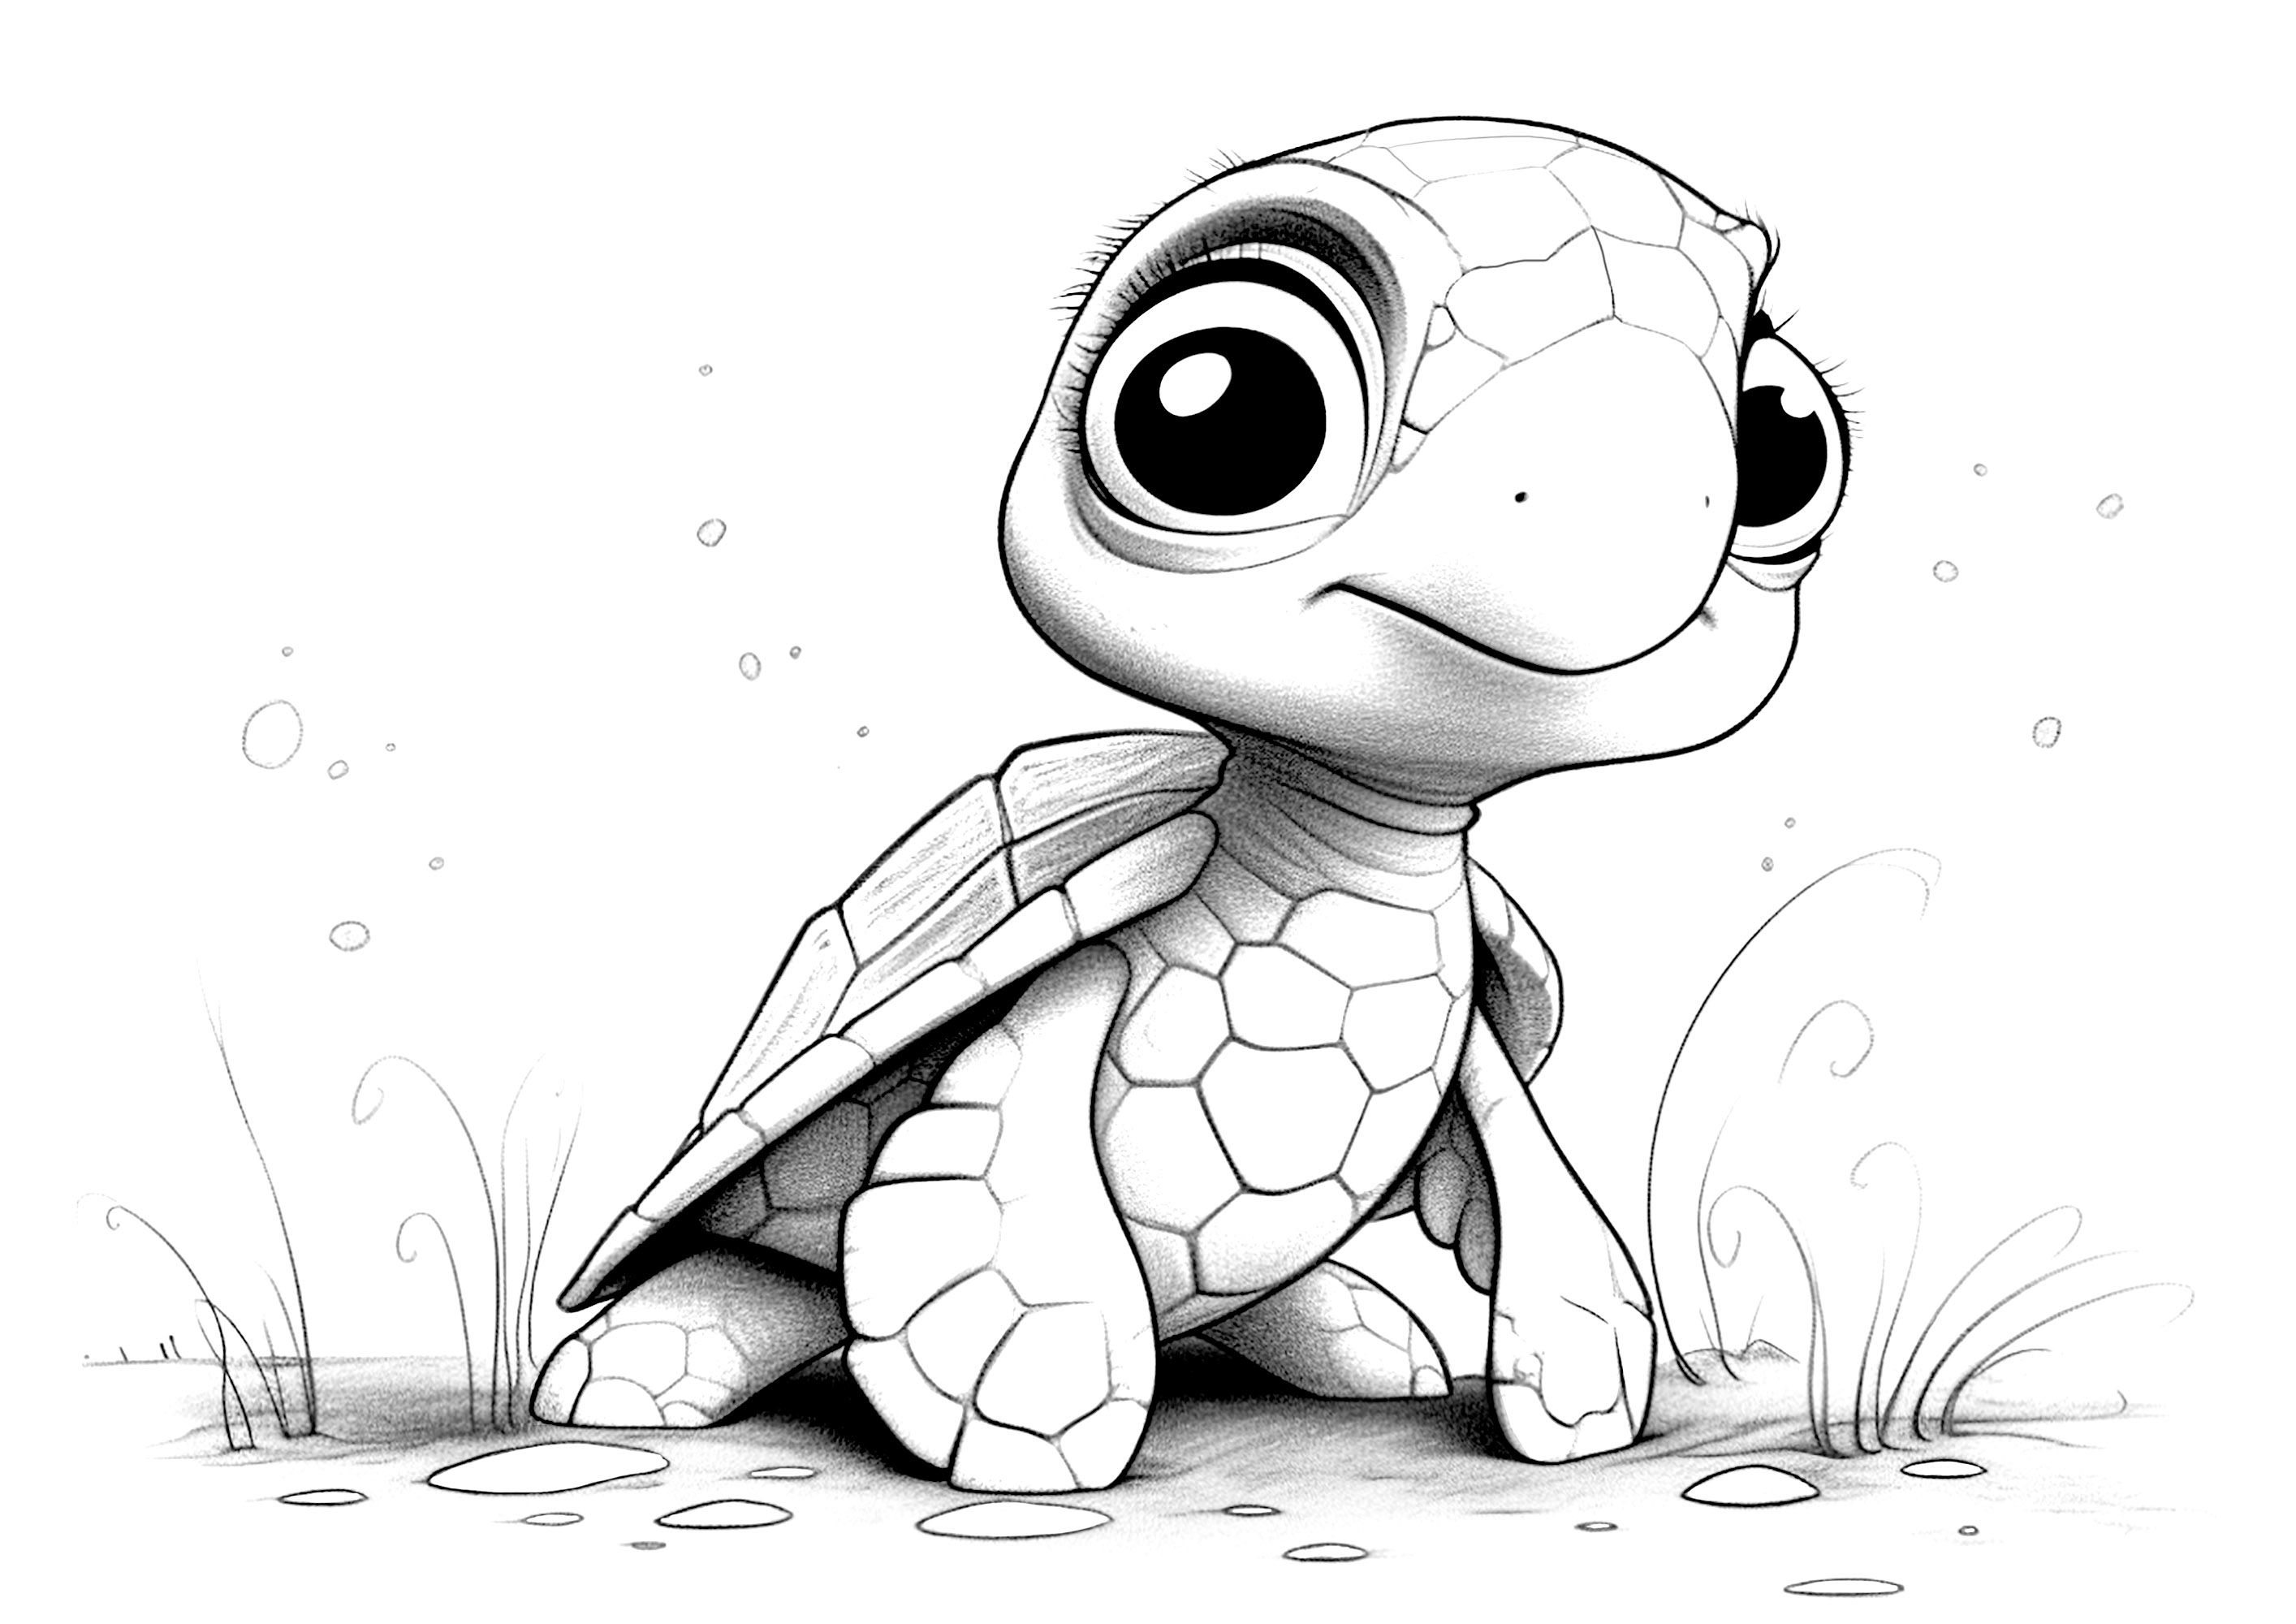 Small turtle. A style mixing pencil drawing and Disney/Pixar-style 3D